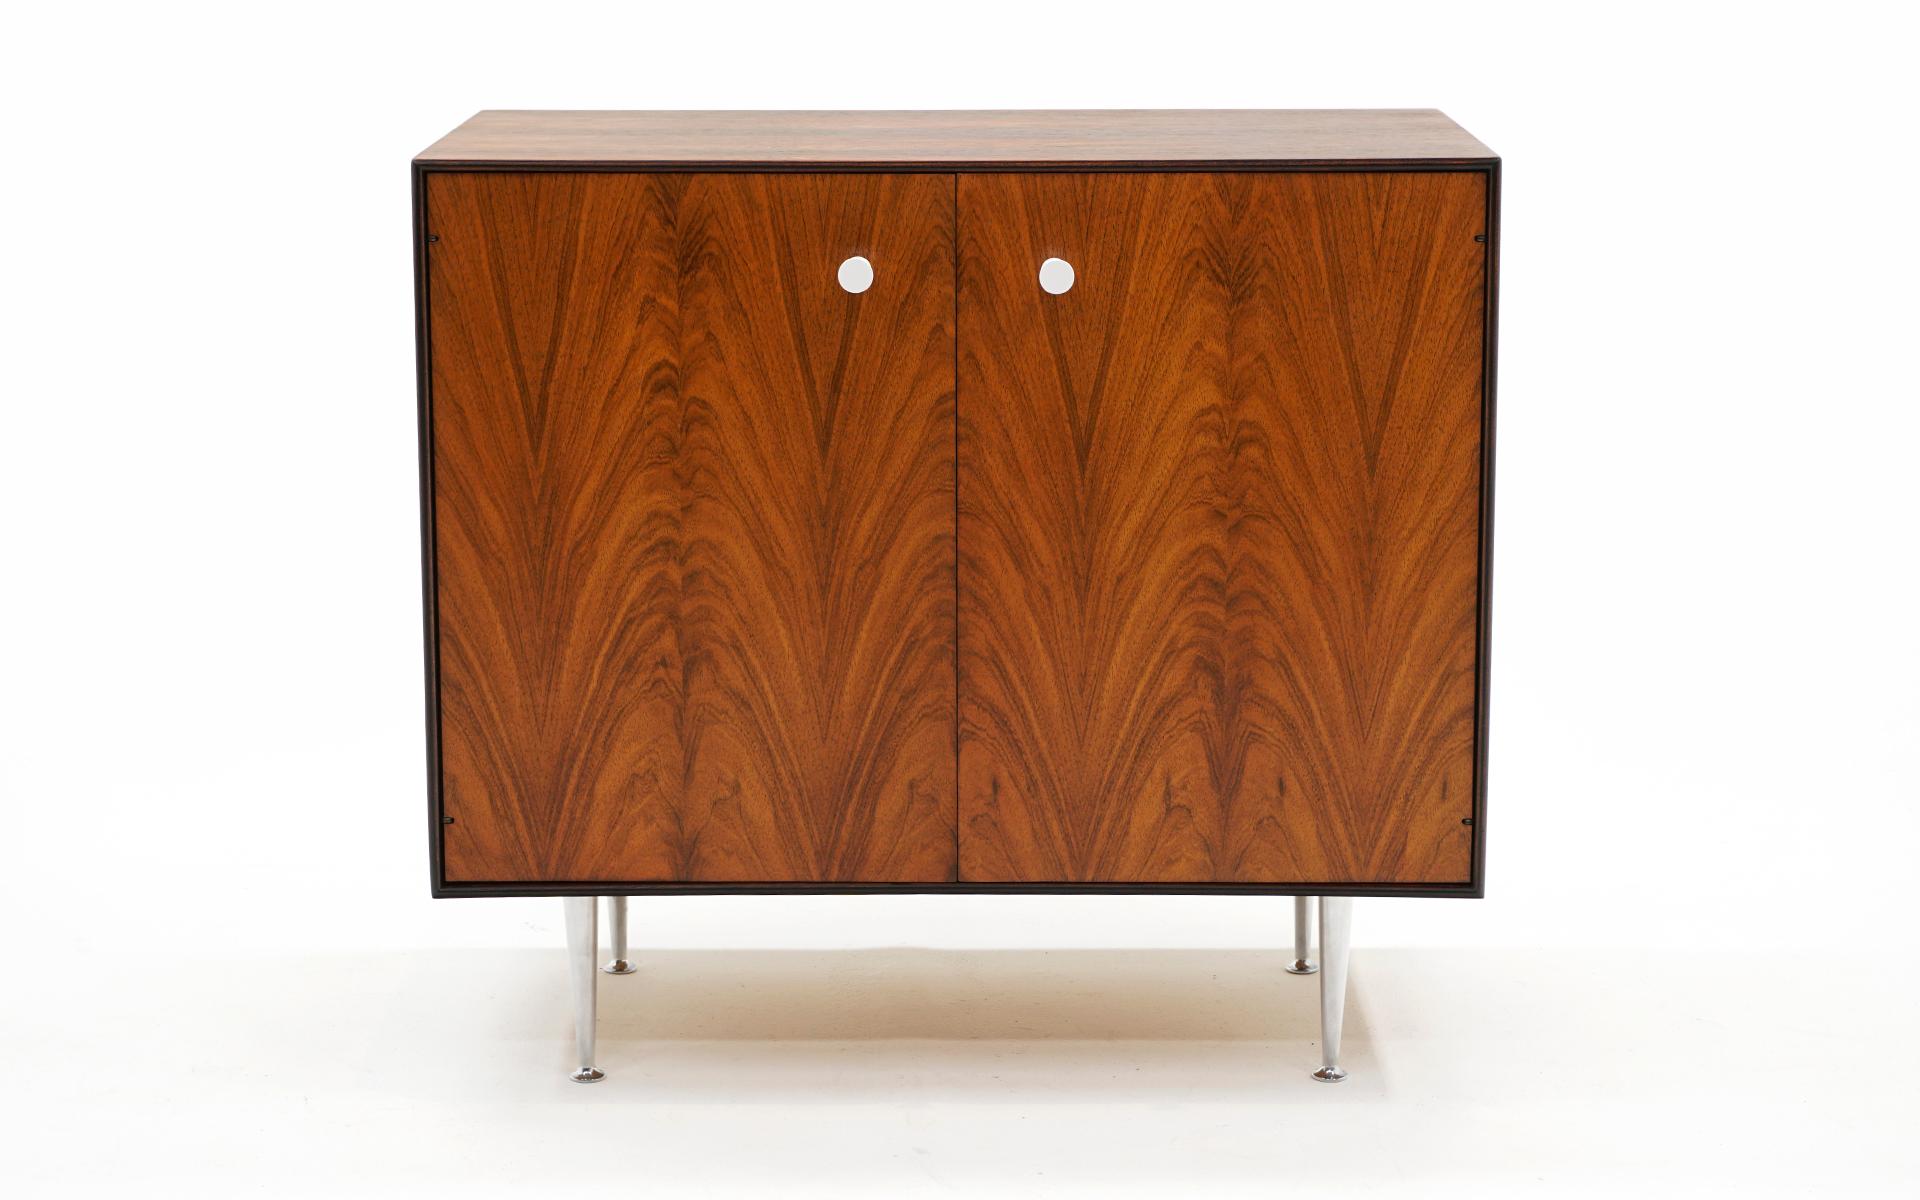 Stunning George Nelson for Herman Miller Brazilian Rosewood Thin Edge cabinet. Two doors with the original adjustable shelf. Porcelain pulls and cast aluminum legs. The figuring in the rosewood on this example is beautiful. Expertly refinished.